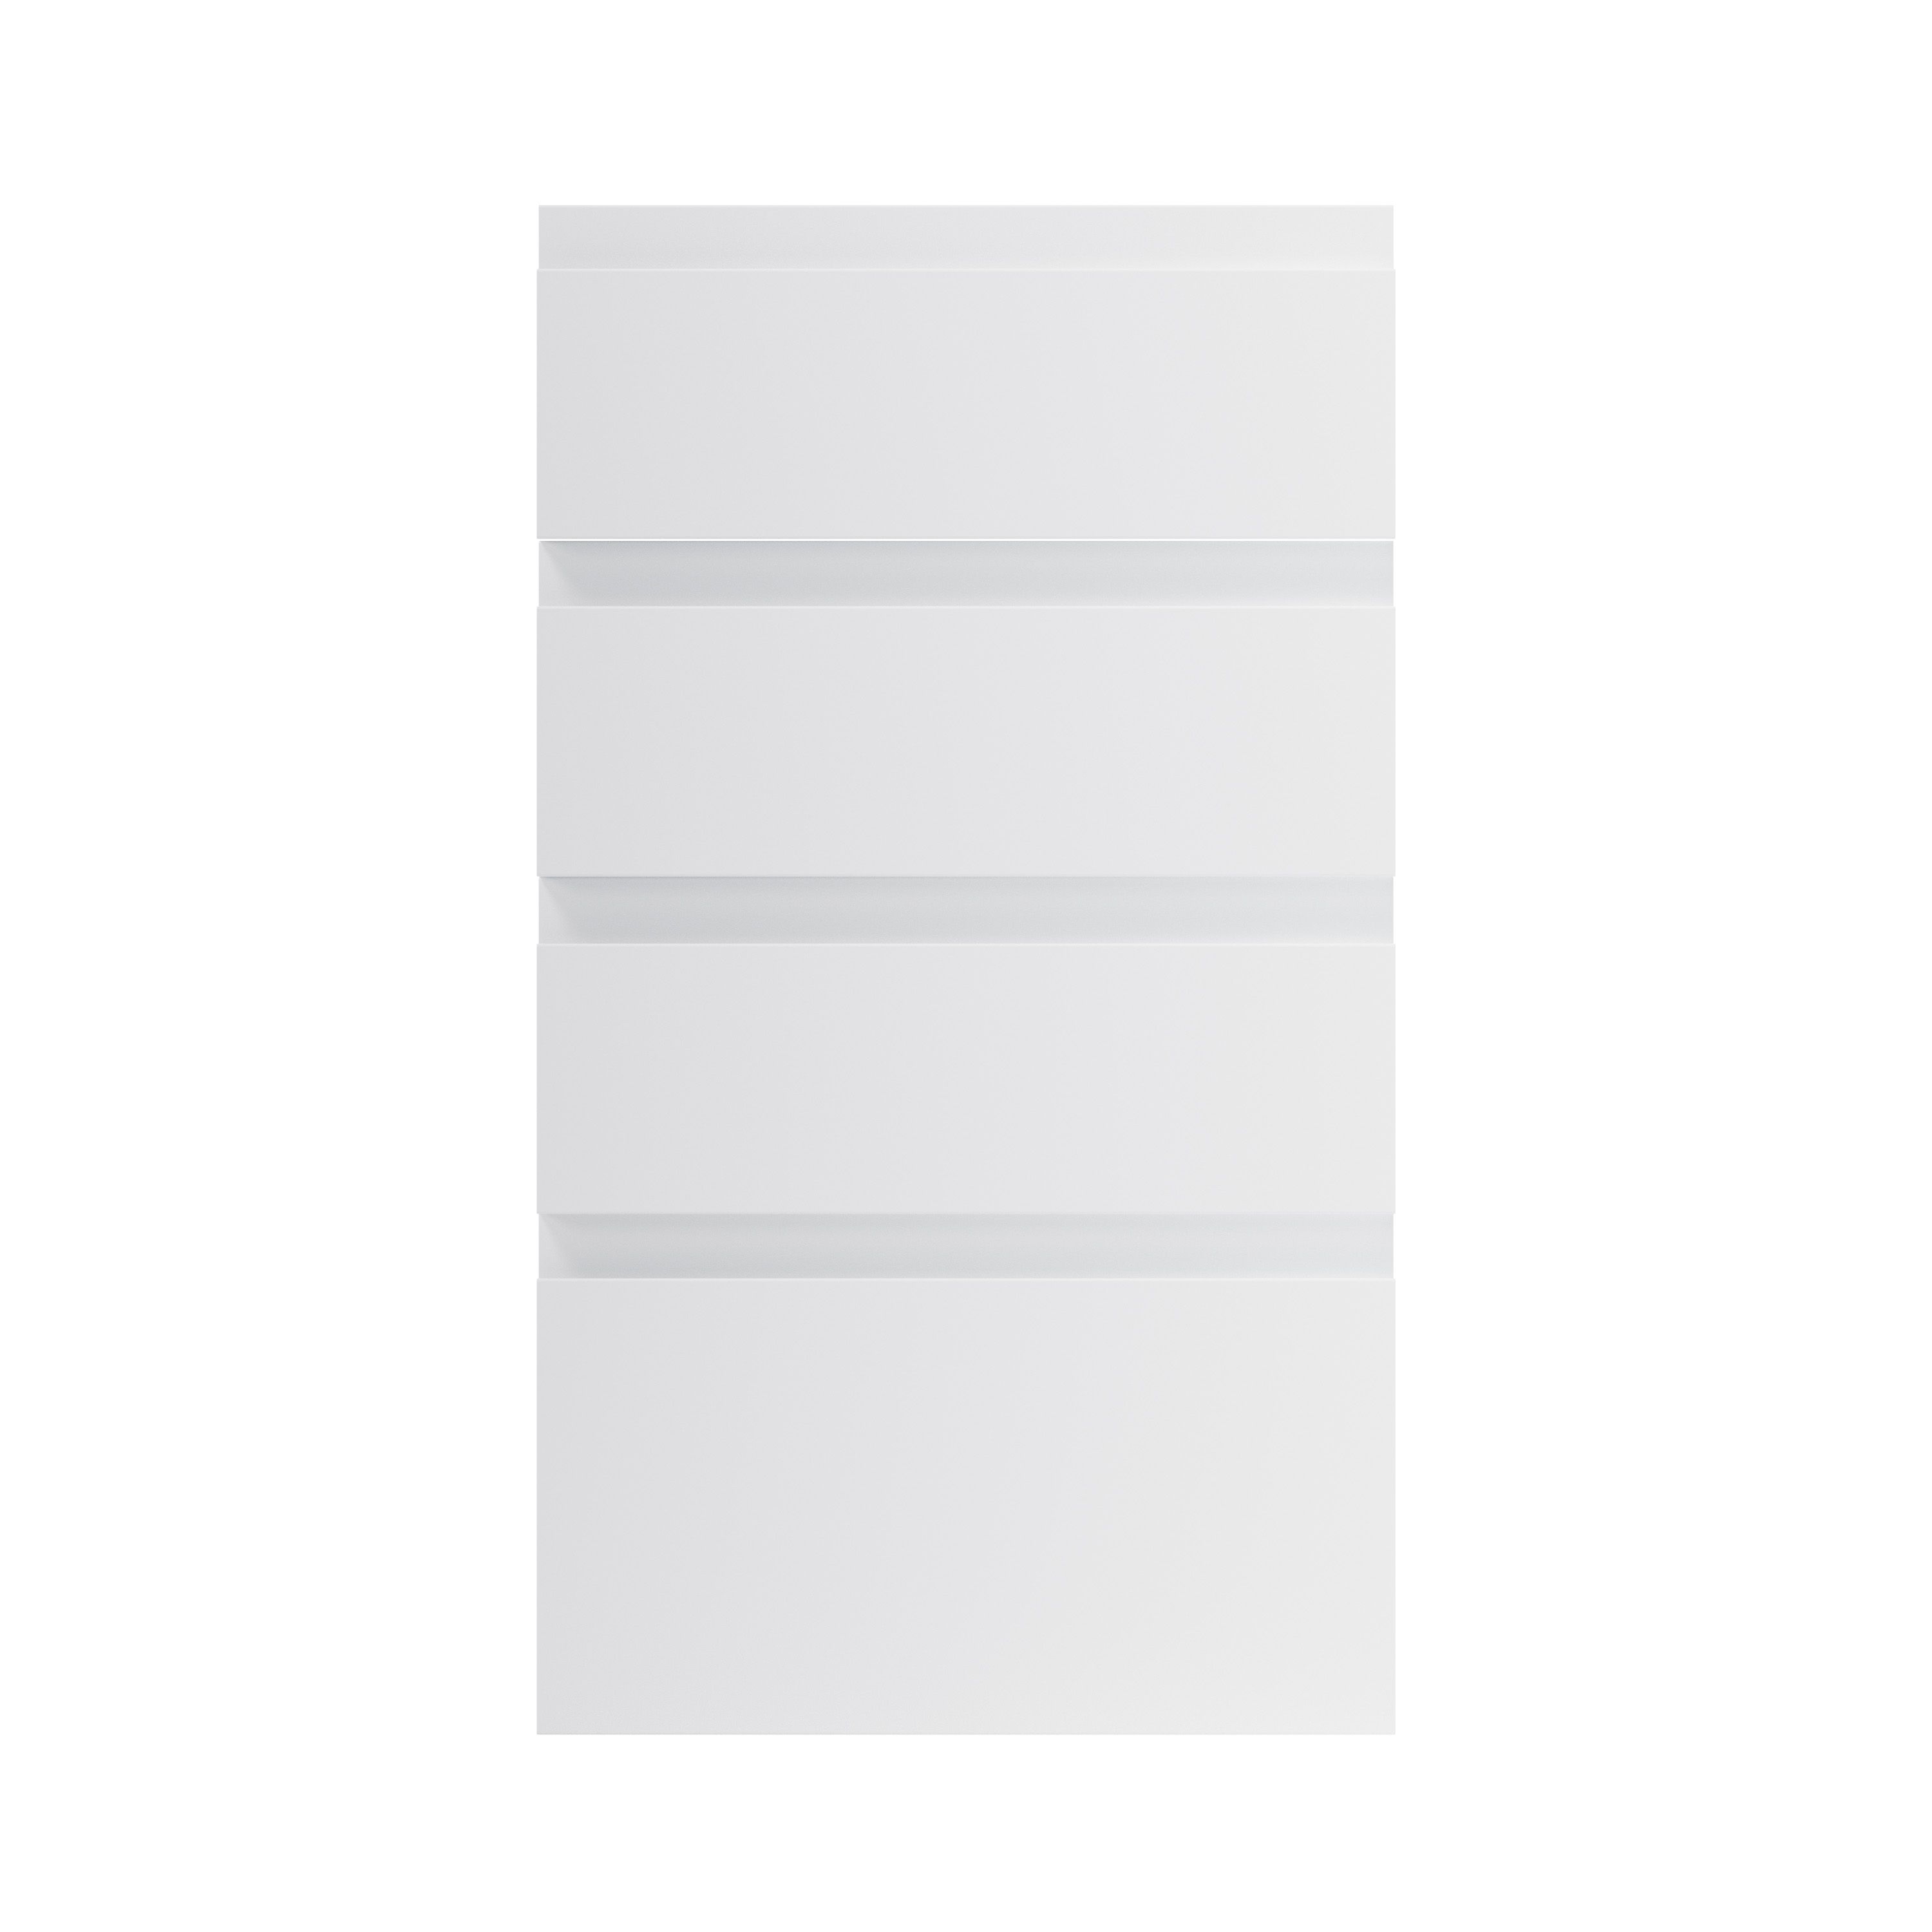 GoodHome Garcinia Gloss light grey integrated handle Drawer front (W)400mm, Pack of 4